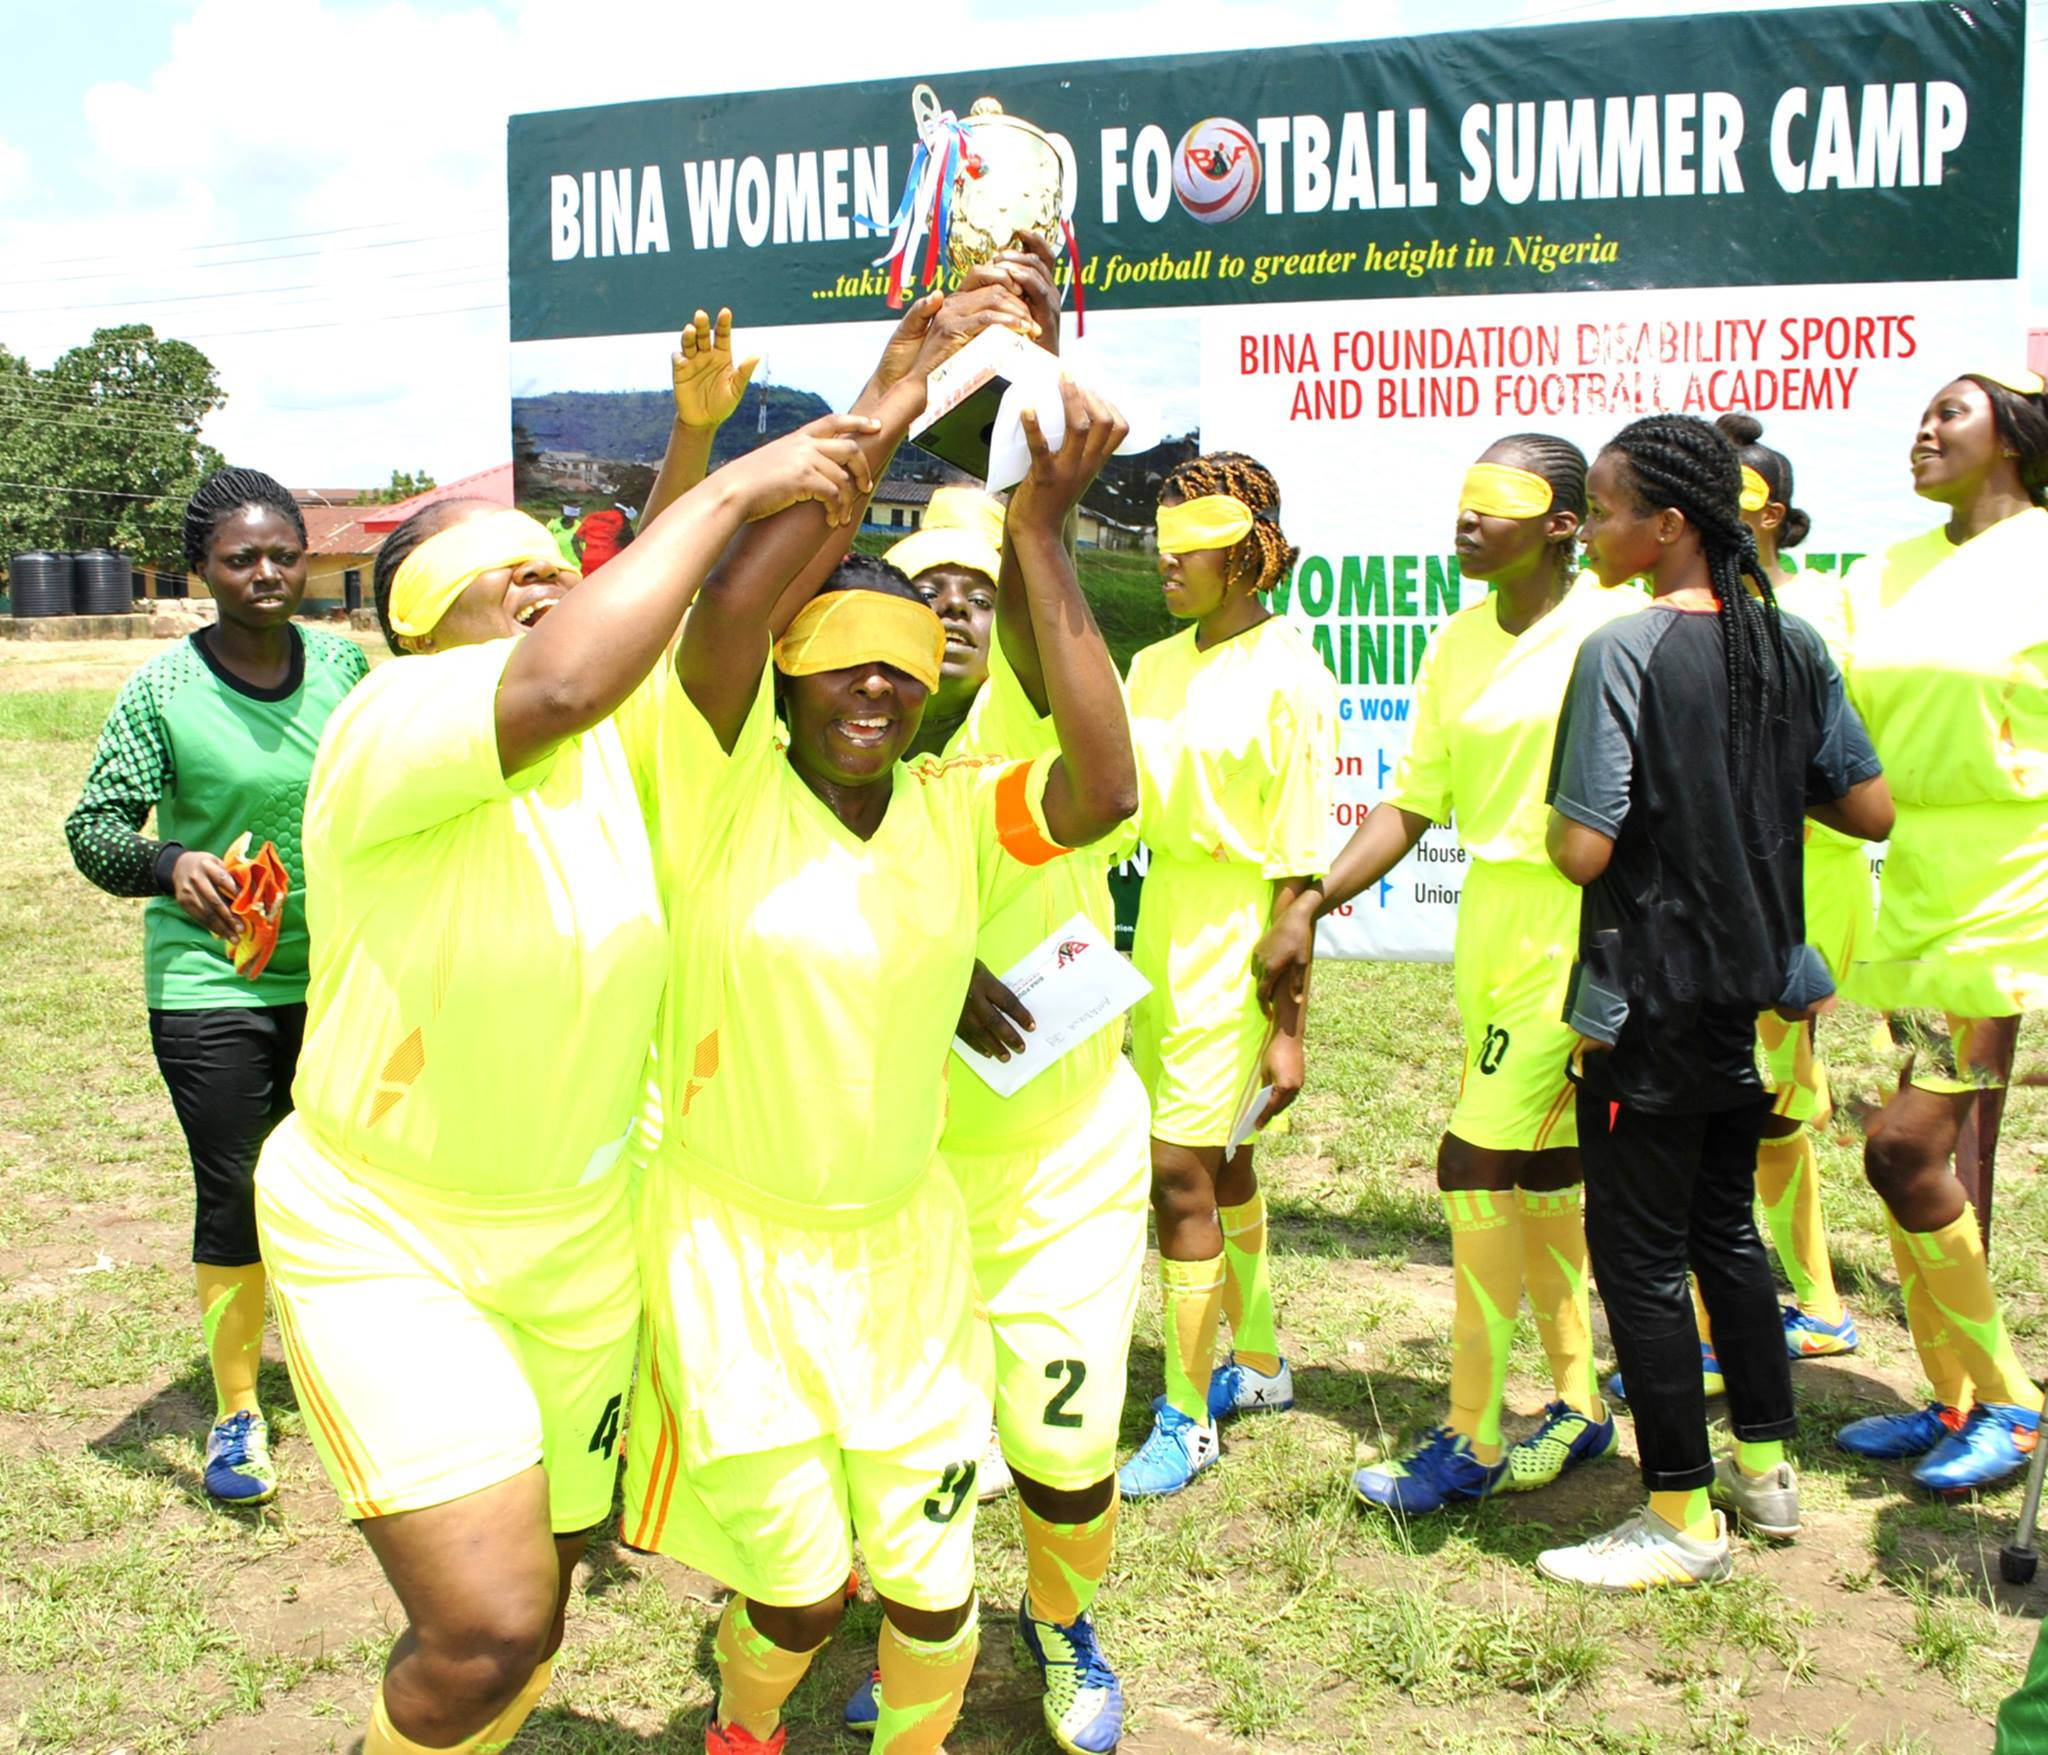 Enugu in Nigeria will host the first edition of the tournament ©IBSA